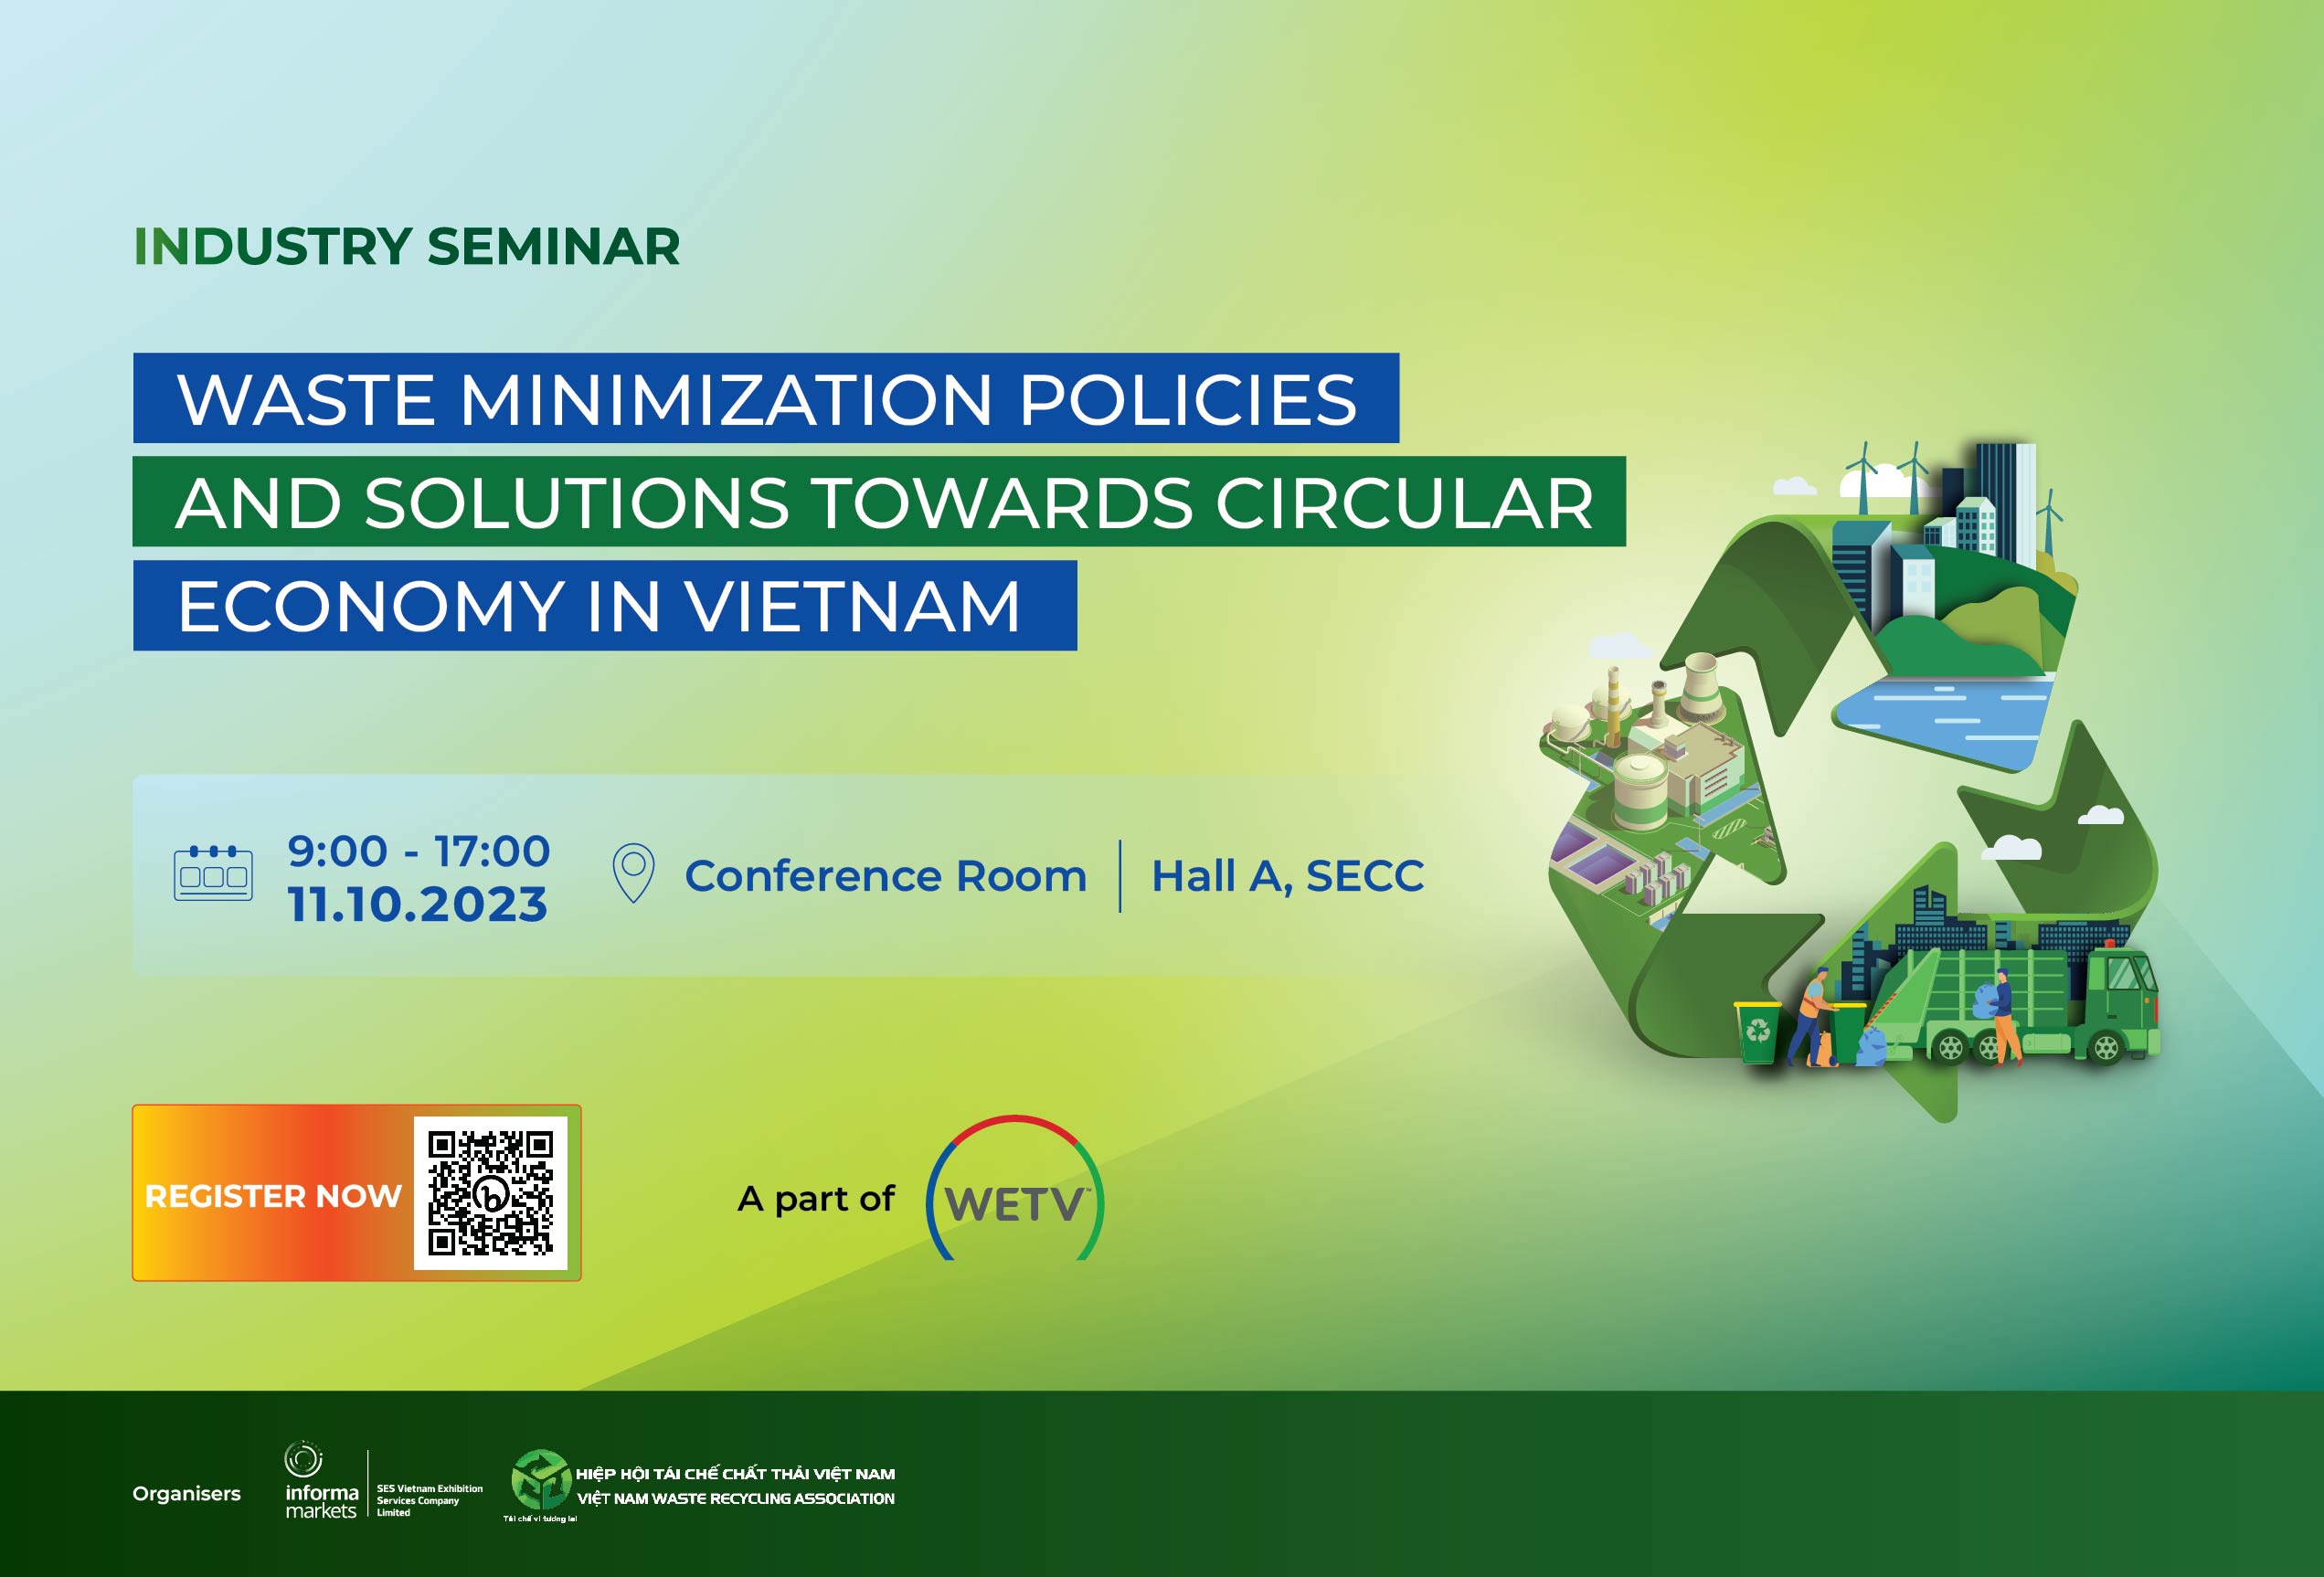 CONFERENCE: “WASTE MINIMIZATION POLICIES AND SOLUTIONS TOWARDS CIRCULAR ECONOMY IN VIETNAM”